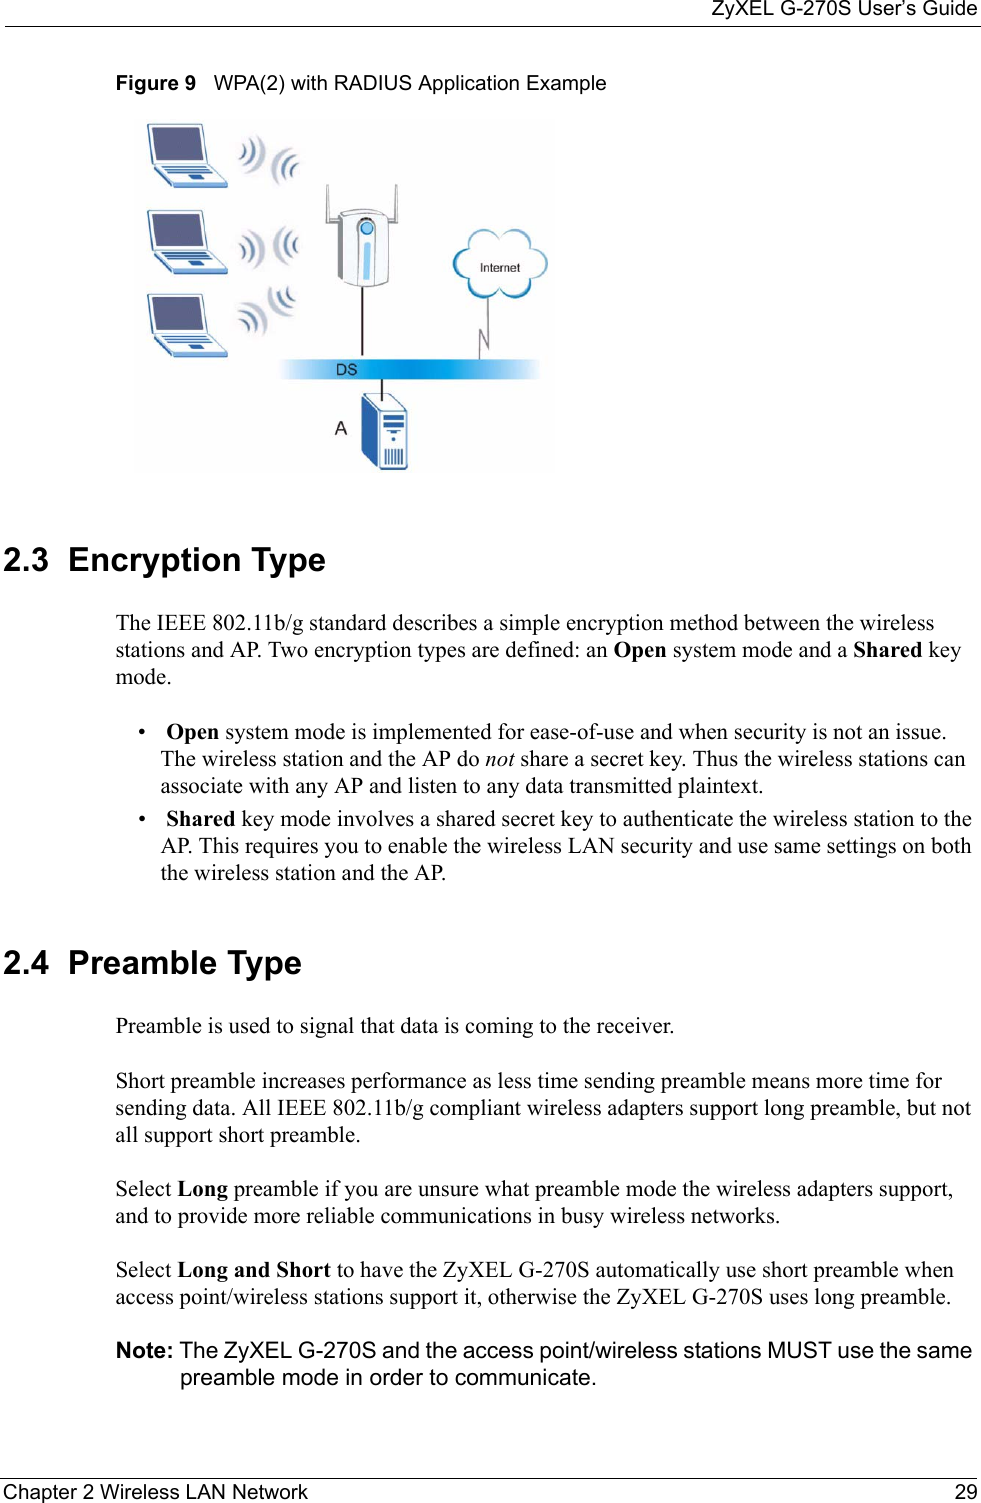 ZyXEL G-270S User’s GuideChapter 2 Wireless LAN Network 29Figure 9   WPA(2) with RADIUS Application Example2.3  Encryption TypeThe IEEE 802.11b/g standard describes a simple encryption method between the wireless stations and AP. Two encryption types are defined: an Open system mode and a Shared key mode.• Open system mode is implemented for ease-of-use and when security is not an issue. The wireless station and the AP do not share a secret key. Thus the wireless stations can associate with any AP and listen to any data transmitted plaintext.• Shared key mode involves a shared secret key to authenticate the wireless station to the AP. This requires you to enable the wireless LAN security and use same settings on both the wireless station and the AP. 2.4  Preamble TypePreamble is used to signal that data is coming to the receiver.  Short preamble increases performance as less time sending preamble means more time for sending data. All IEEE 802.11b/g compliant wireless adapters support long preamble, but not all support short preamble. Select Long preamble if you are unsure what preamble mode the wireless adapters support, and to provide more reliable communications in busy wireless networks. Select Long and Short to have the ZyXEL G-270S automatically use short preamble when  access point/wireless stations support it, otherwise the ZyXEL G-270S uses long preamble. Note: The ZyXEL G-270S and the access point/wireless stations MUST use the same preamble mode in order to communicate.